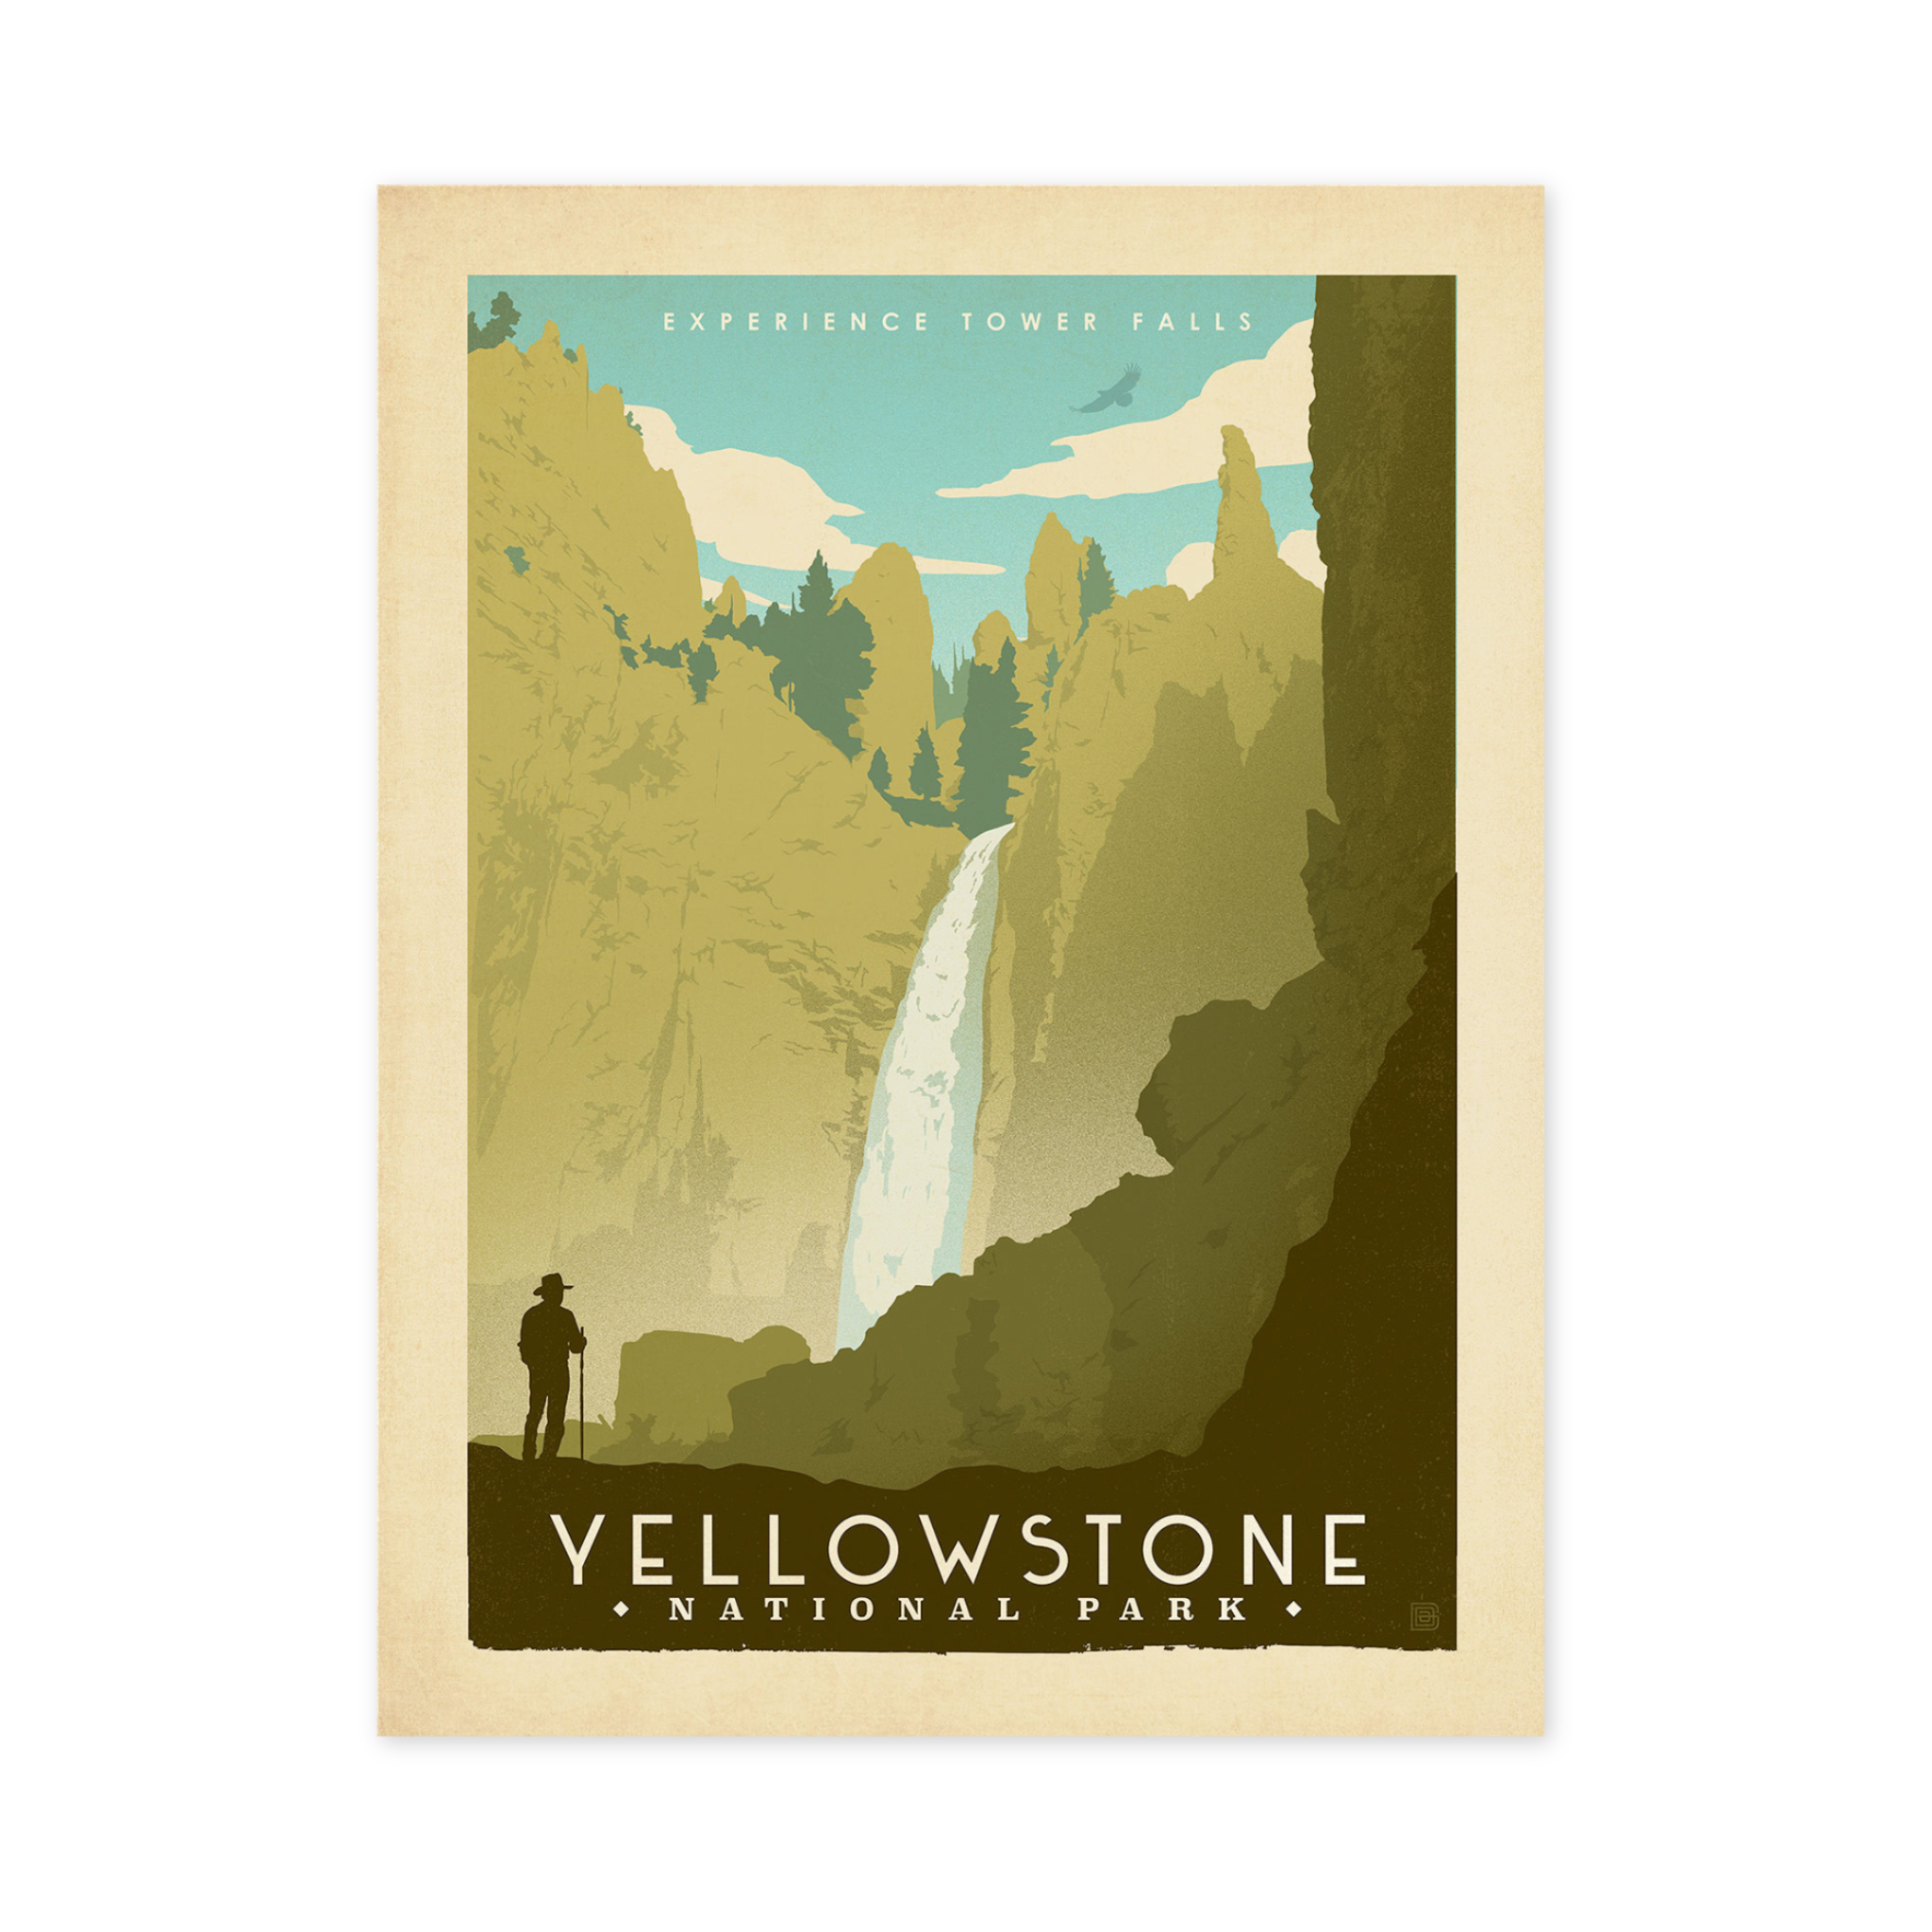 print with yellowstone falls and a hiker with yellowstone national park printed on the bottom